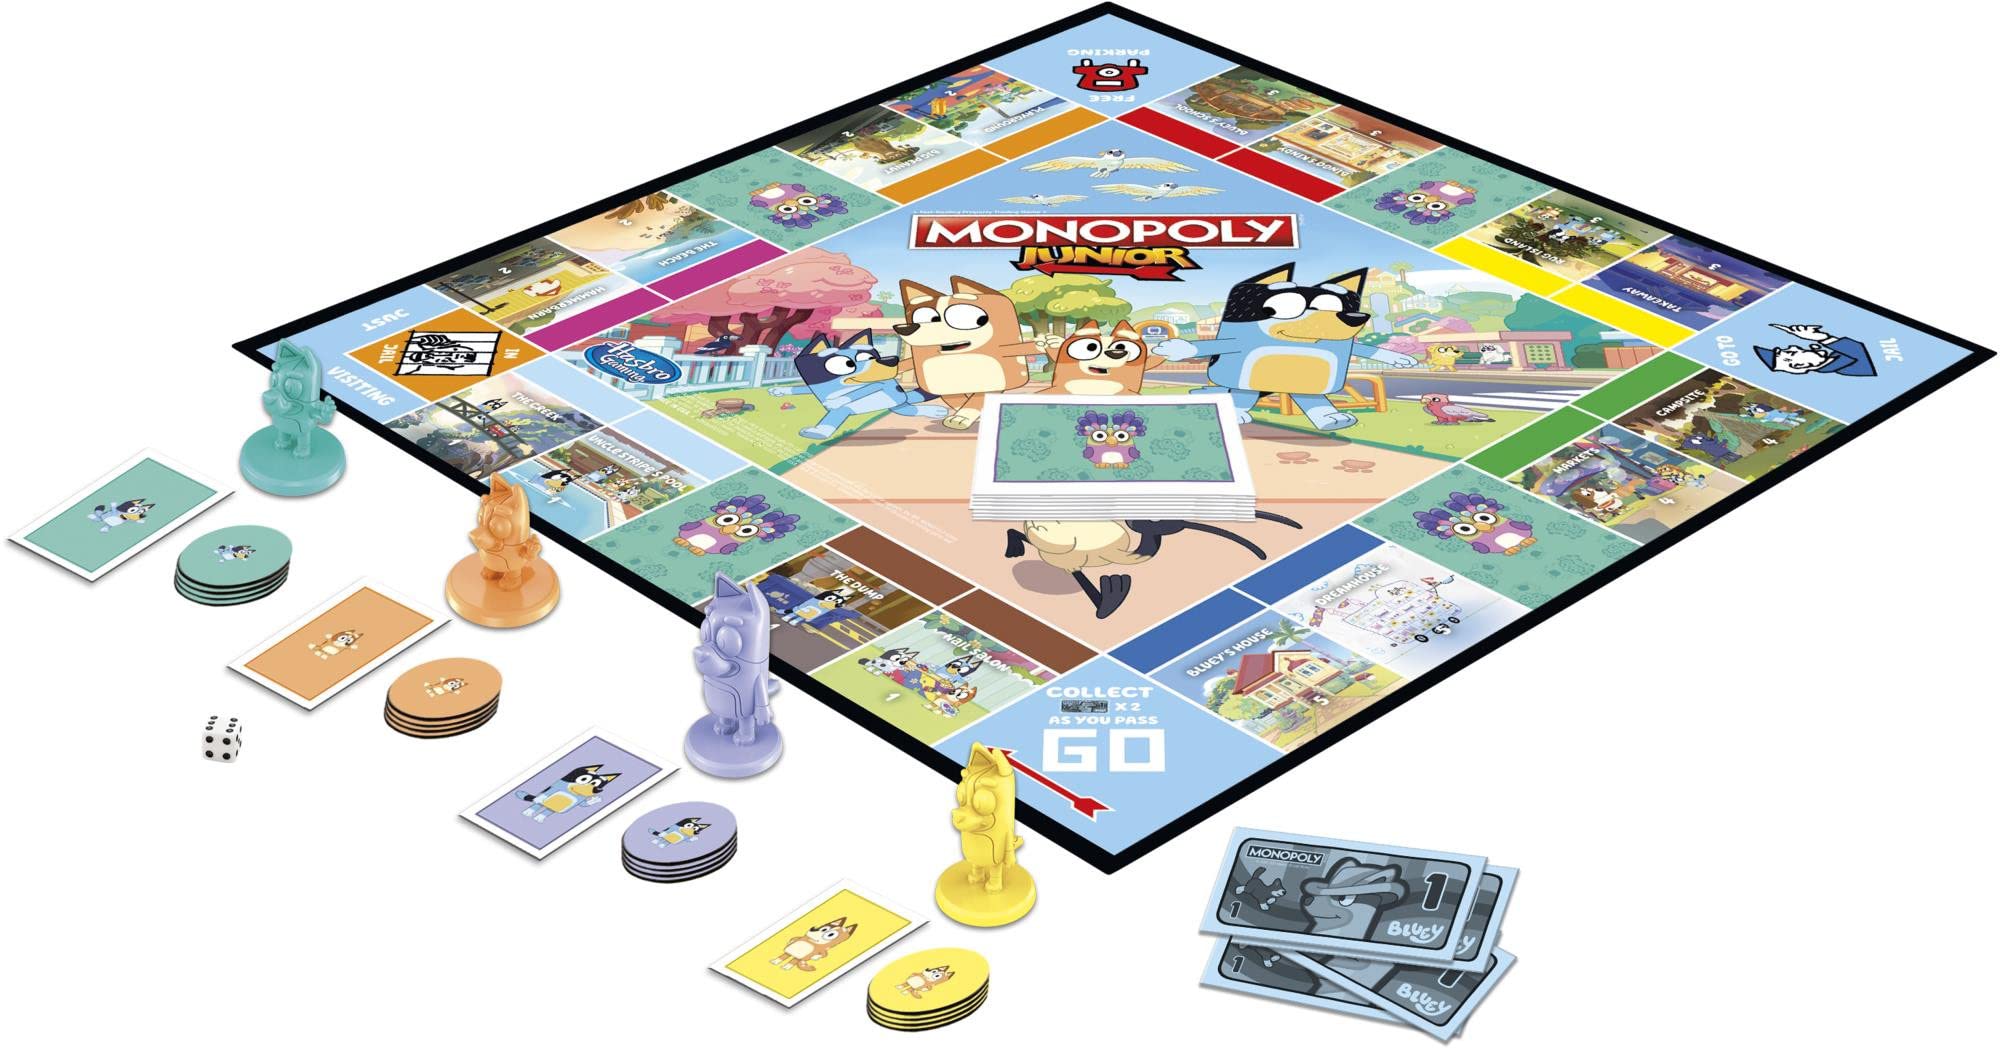 Monopoly Junior: Bluey Edition Board Game for Kids Ages 5+, Play as Bluey, Bingo, Mum, and Dad, Features Artwork from the Animated Series (Amazon Exclusive)